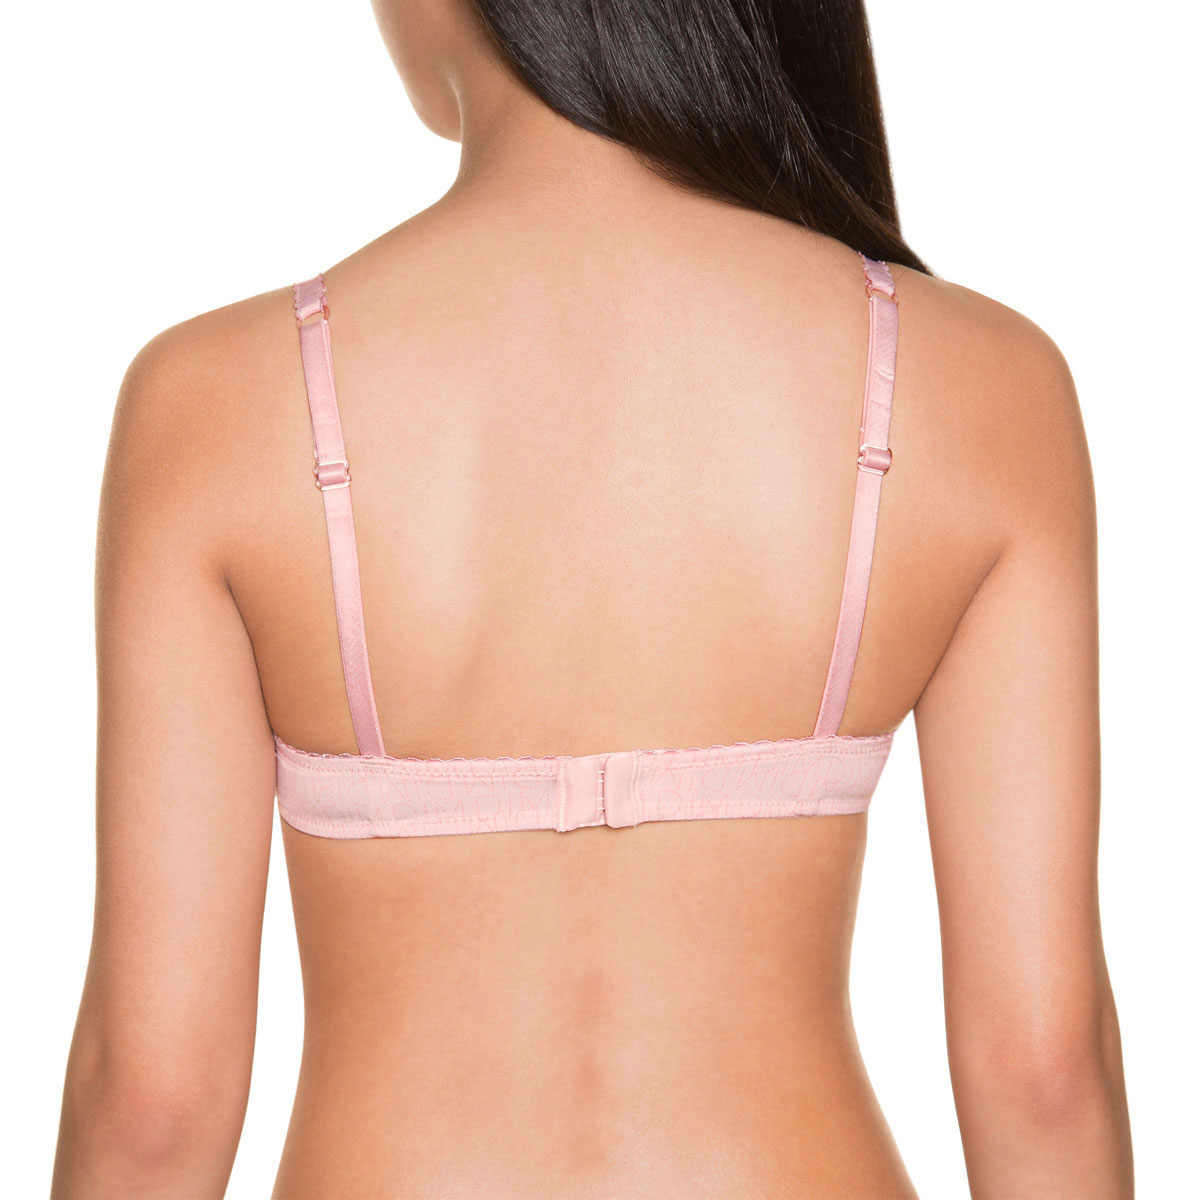 Women's Light Support Rib Triangle Bra - All In Motion™ Pink S